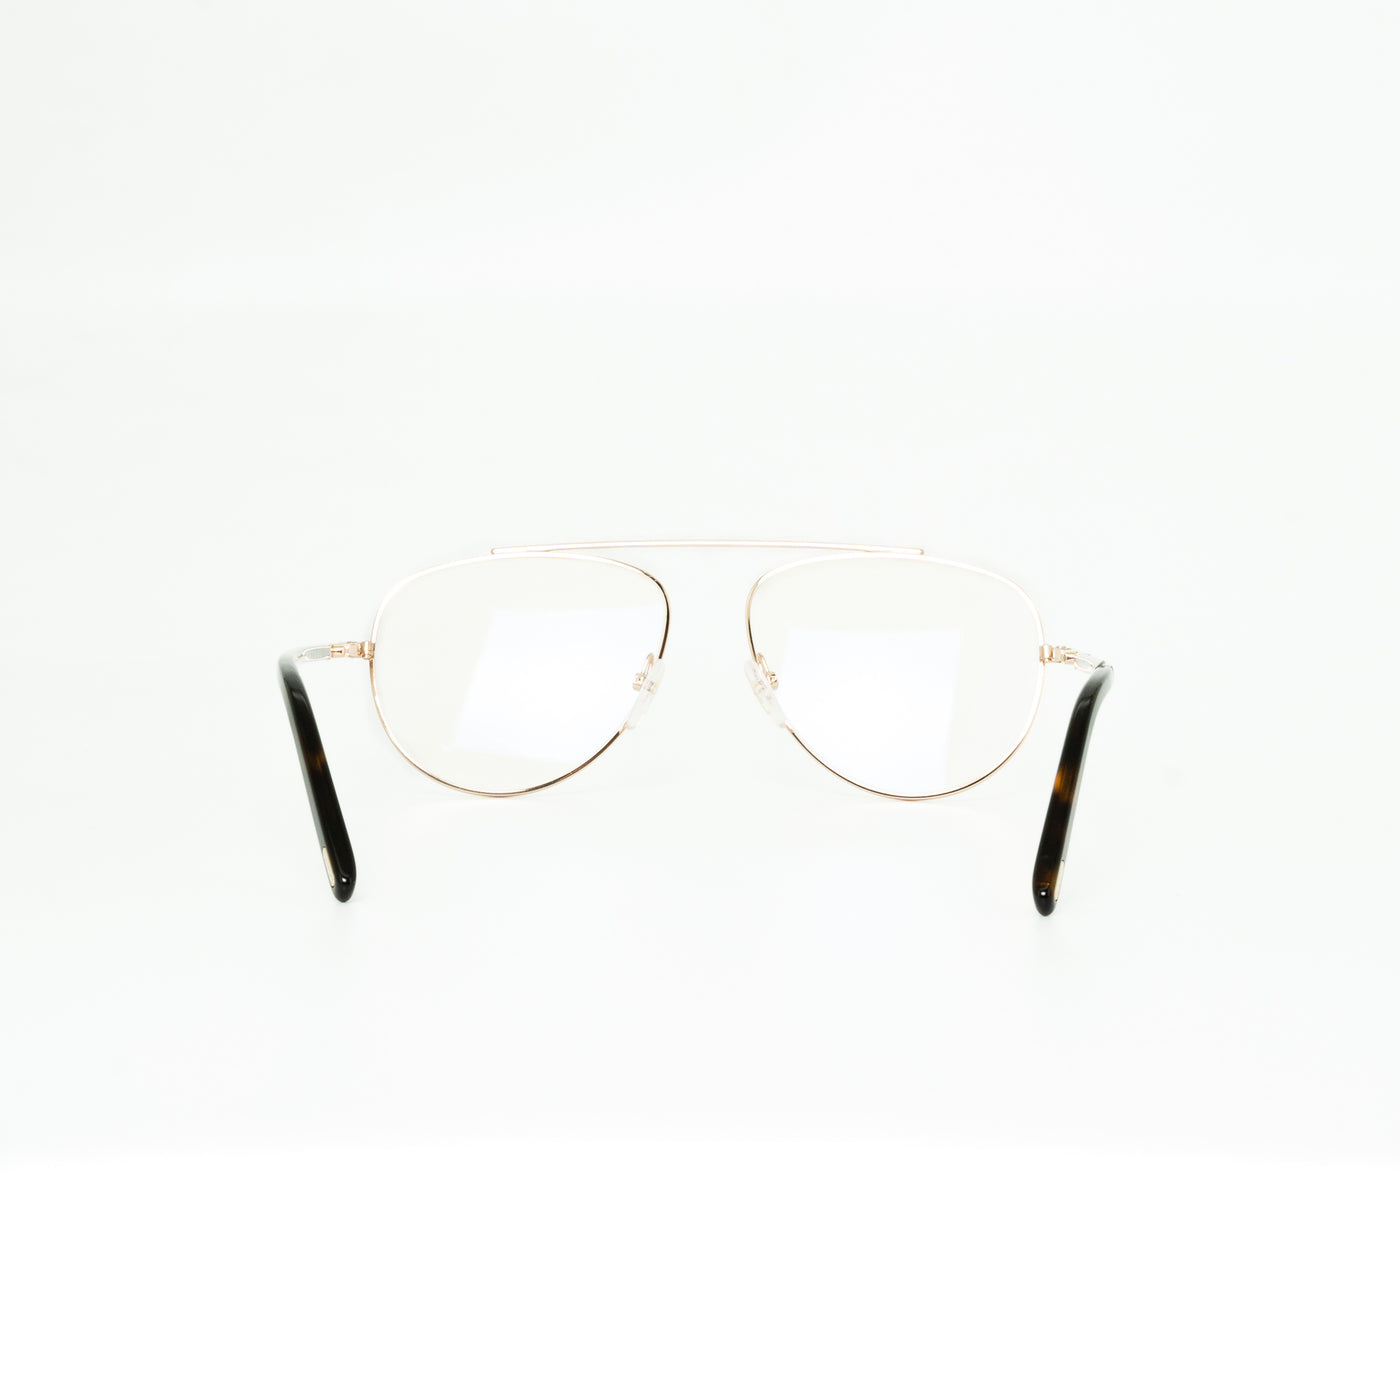 Tom Ford FT5622B02857 | Eyeglasses - Vision Express Optical Philippines